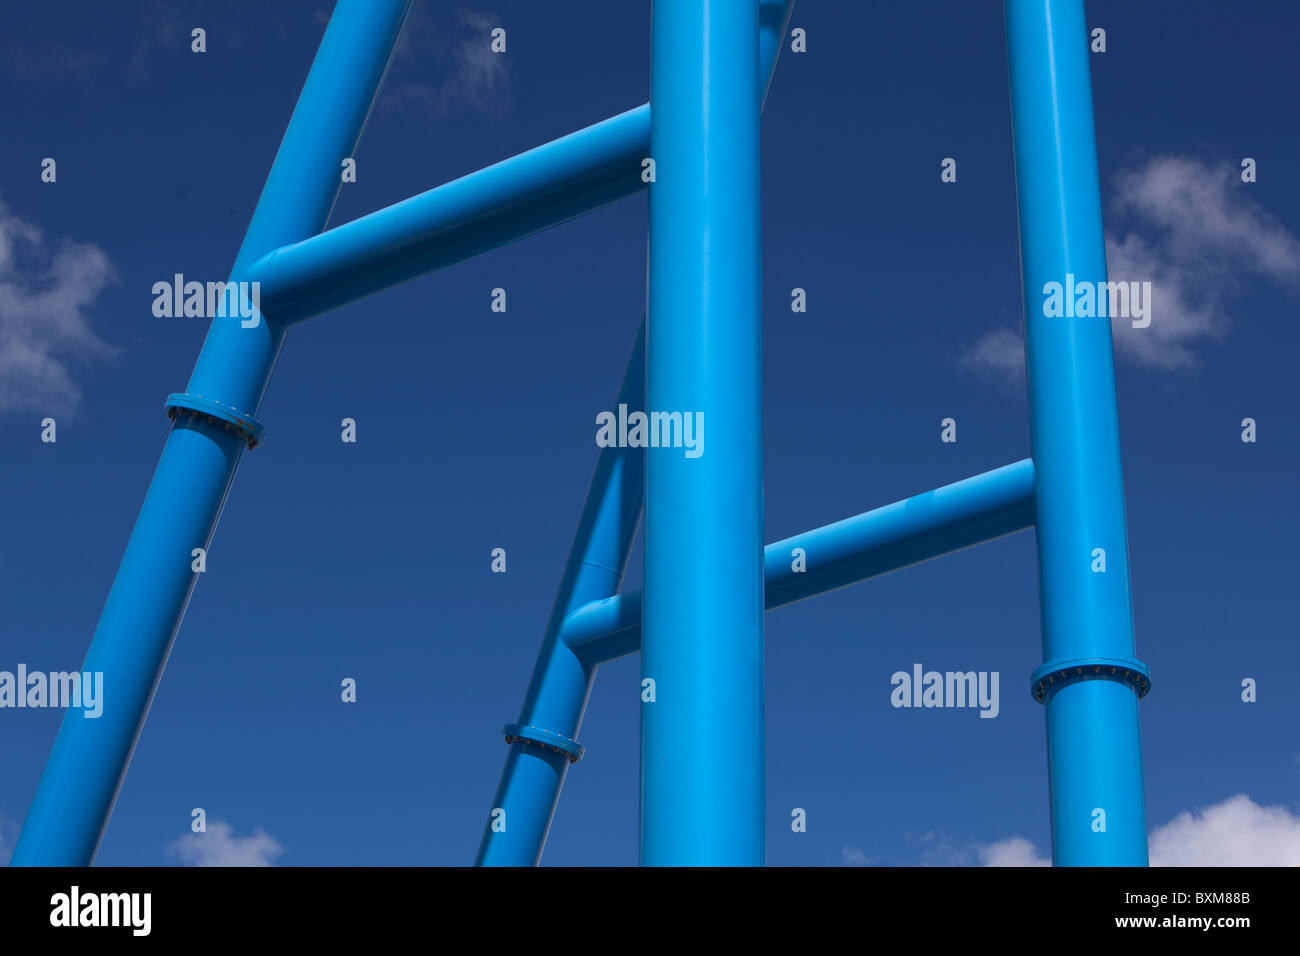 A frame structures in the sky Stock Photo